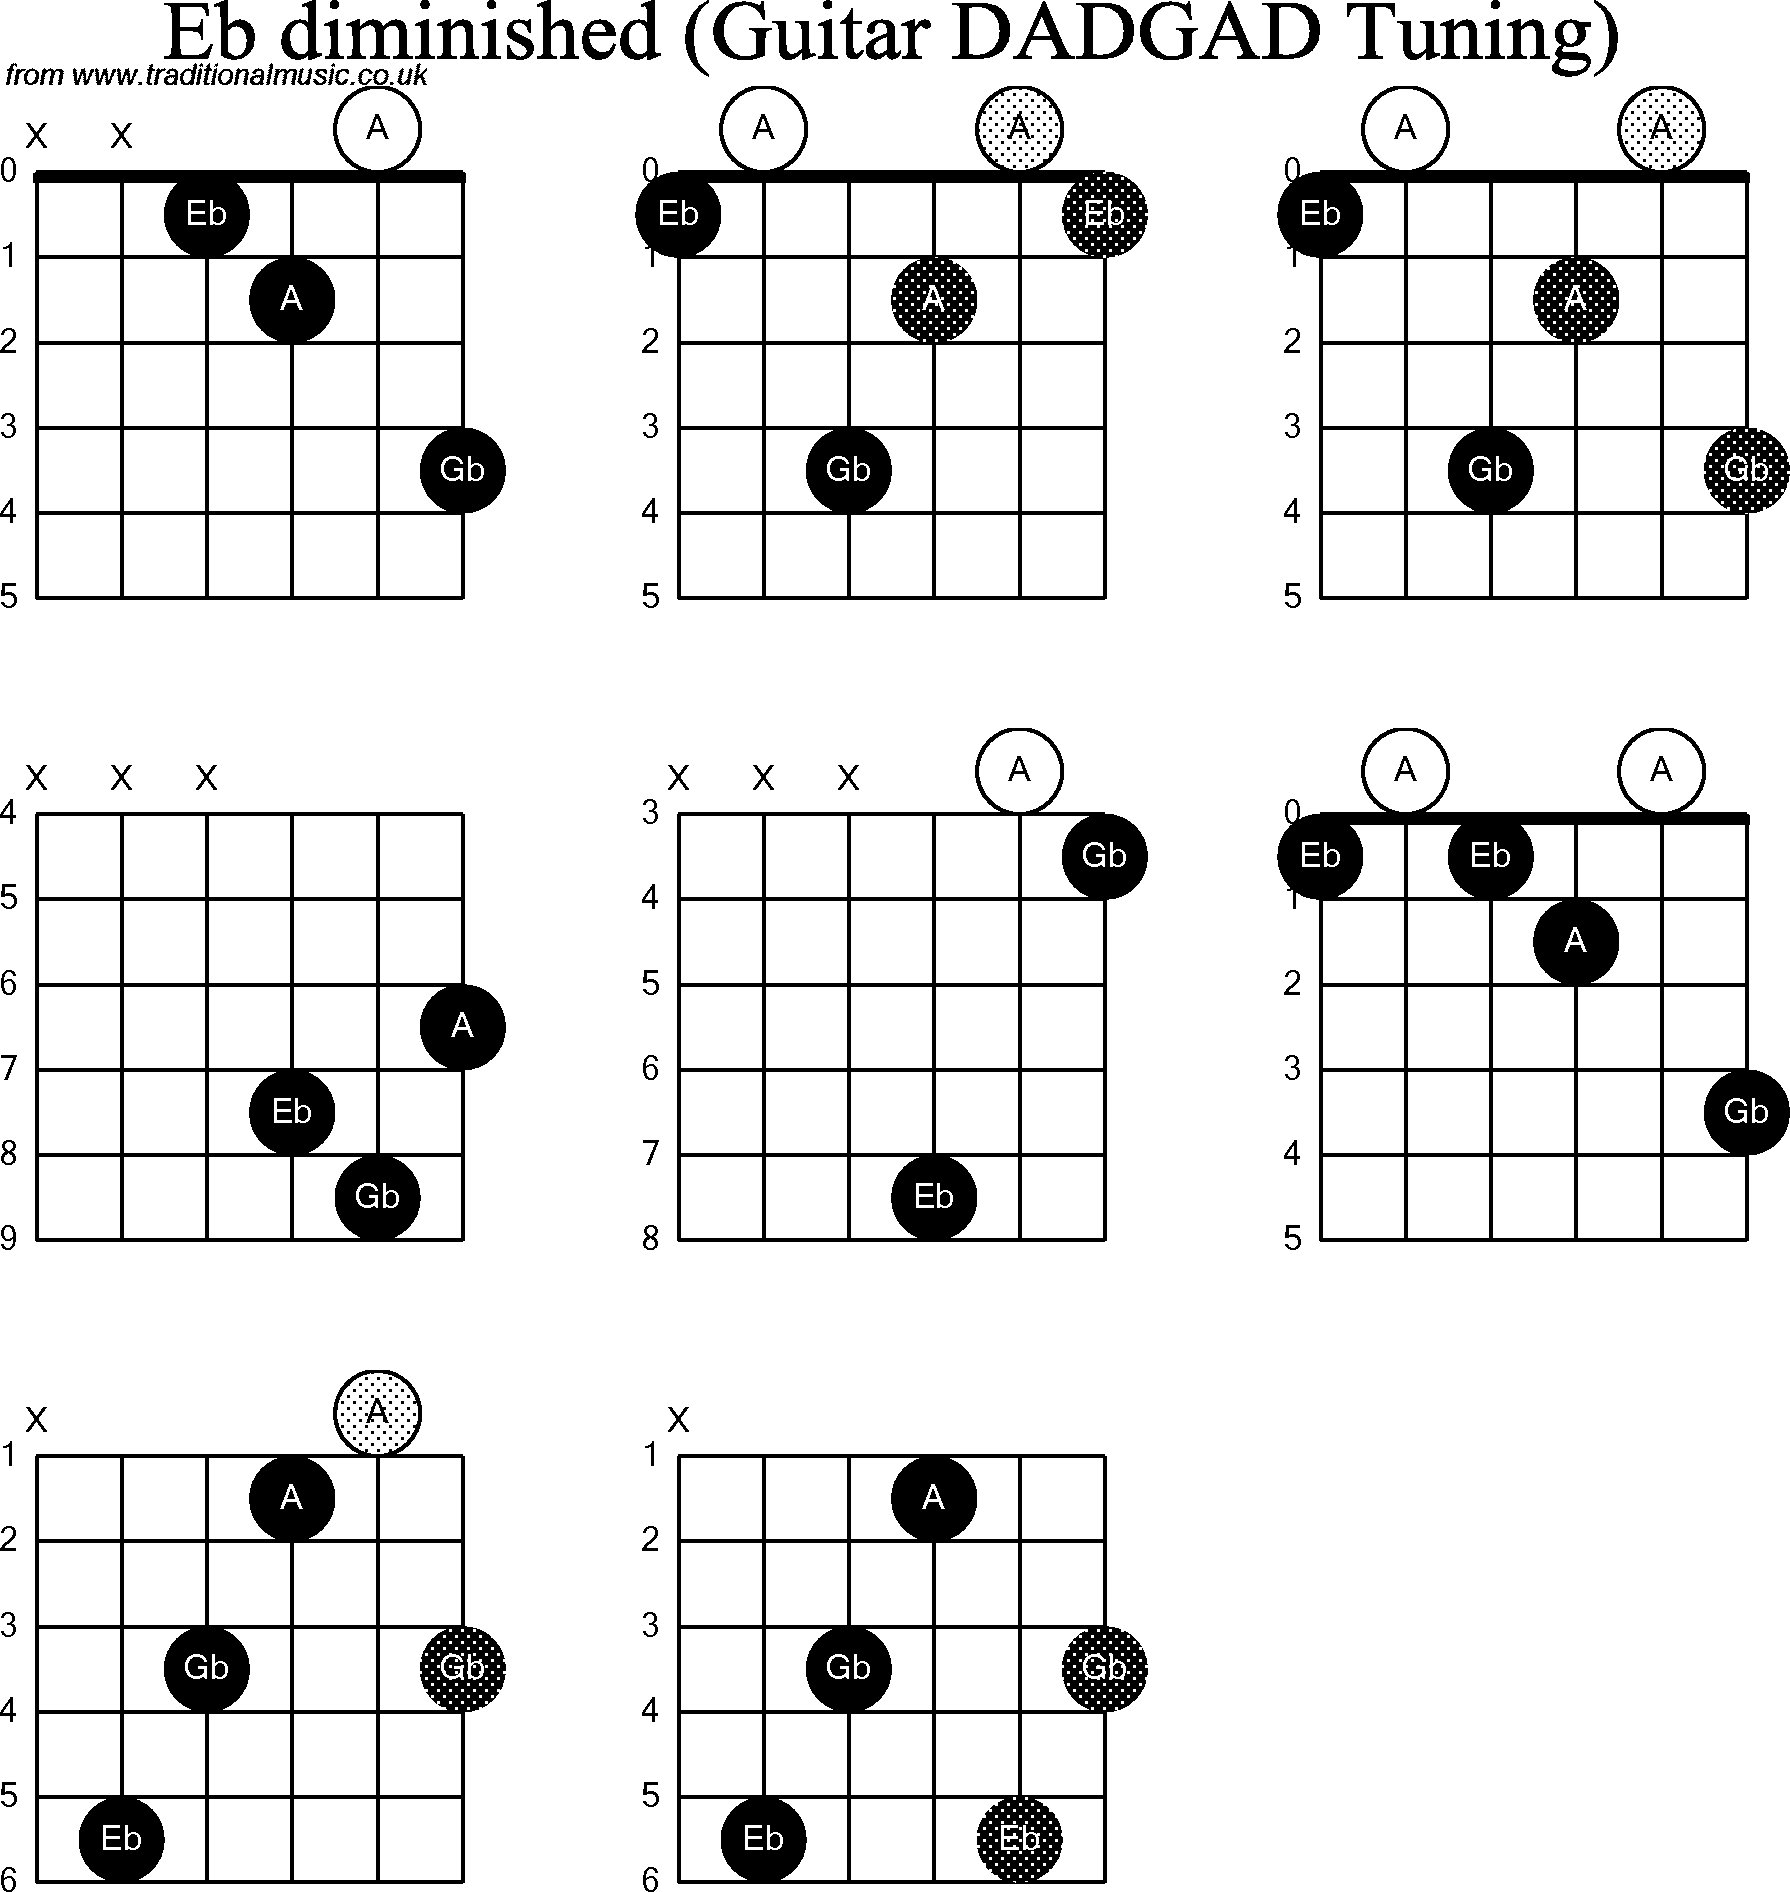 Chord Diagrams for D Modal Guitar(DADGAD), Eb Diminished